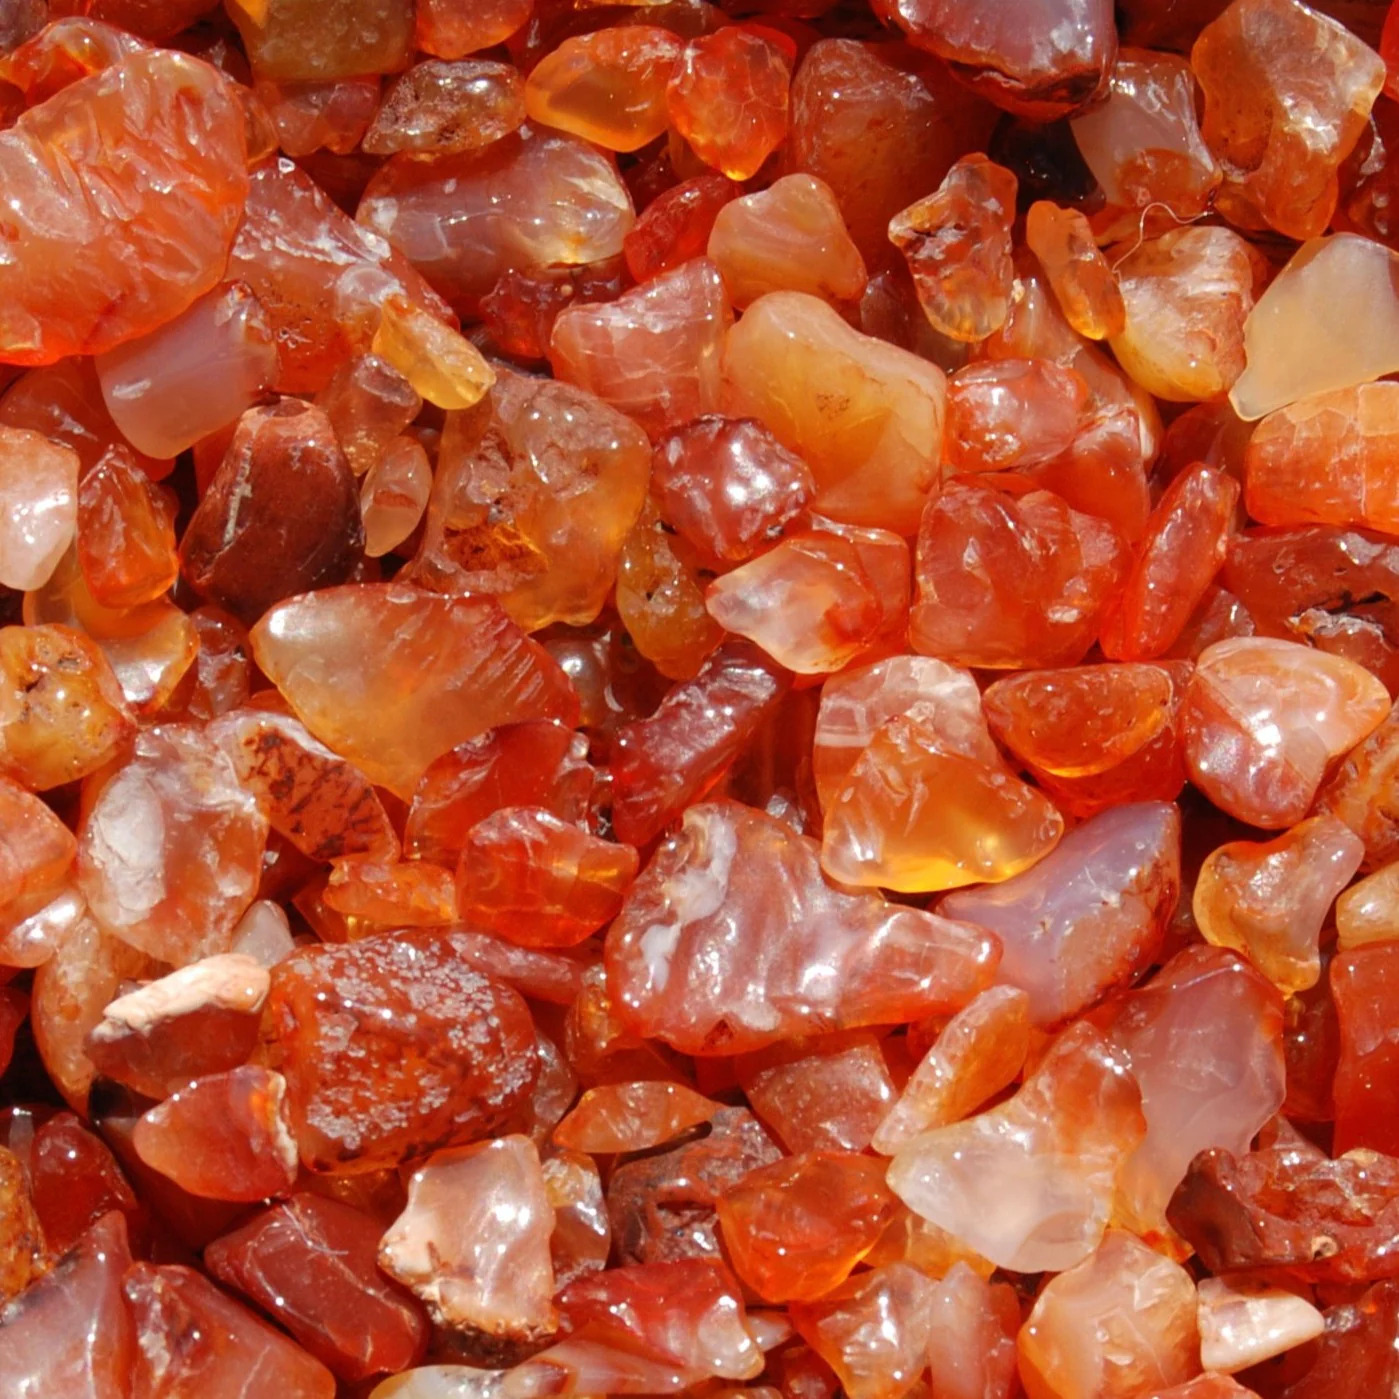 30-40pcs Carnelian Agate Crystal Tumbled Stones, Extra Small